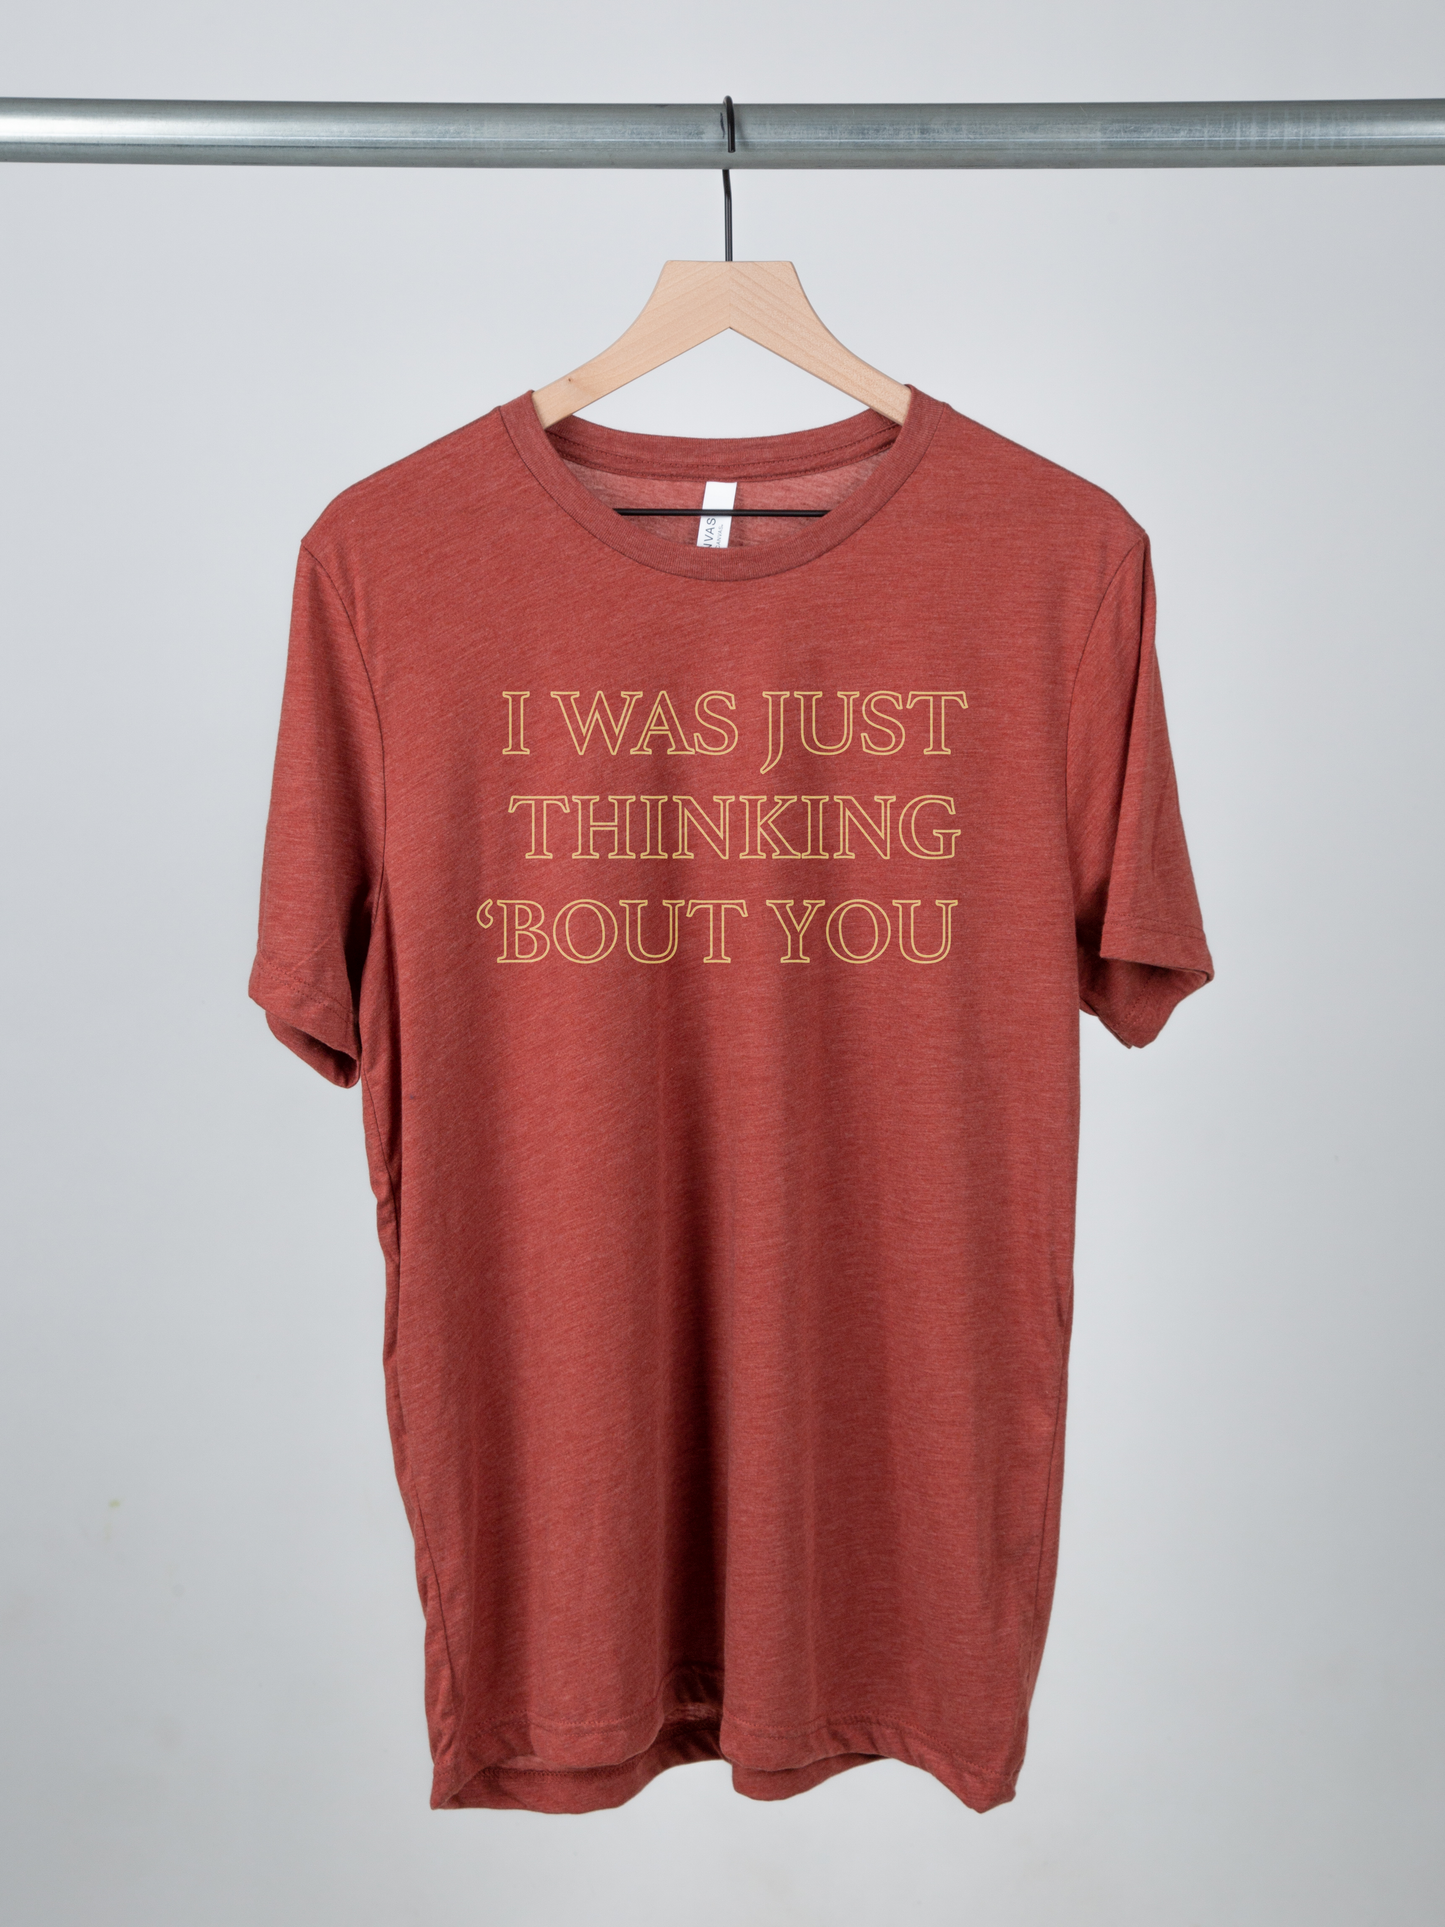 I was just thinking bout you red clay tee Dustin Lynch 